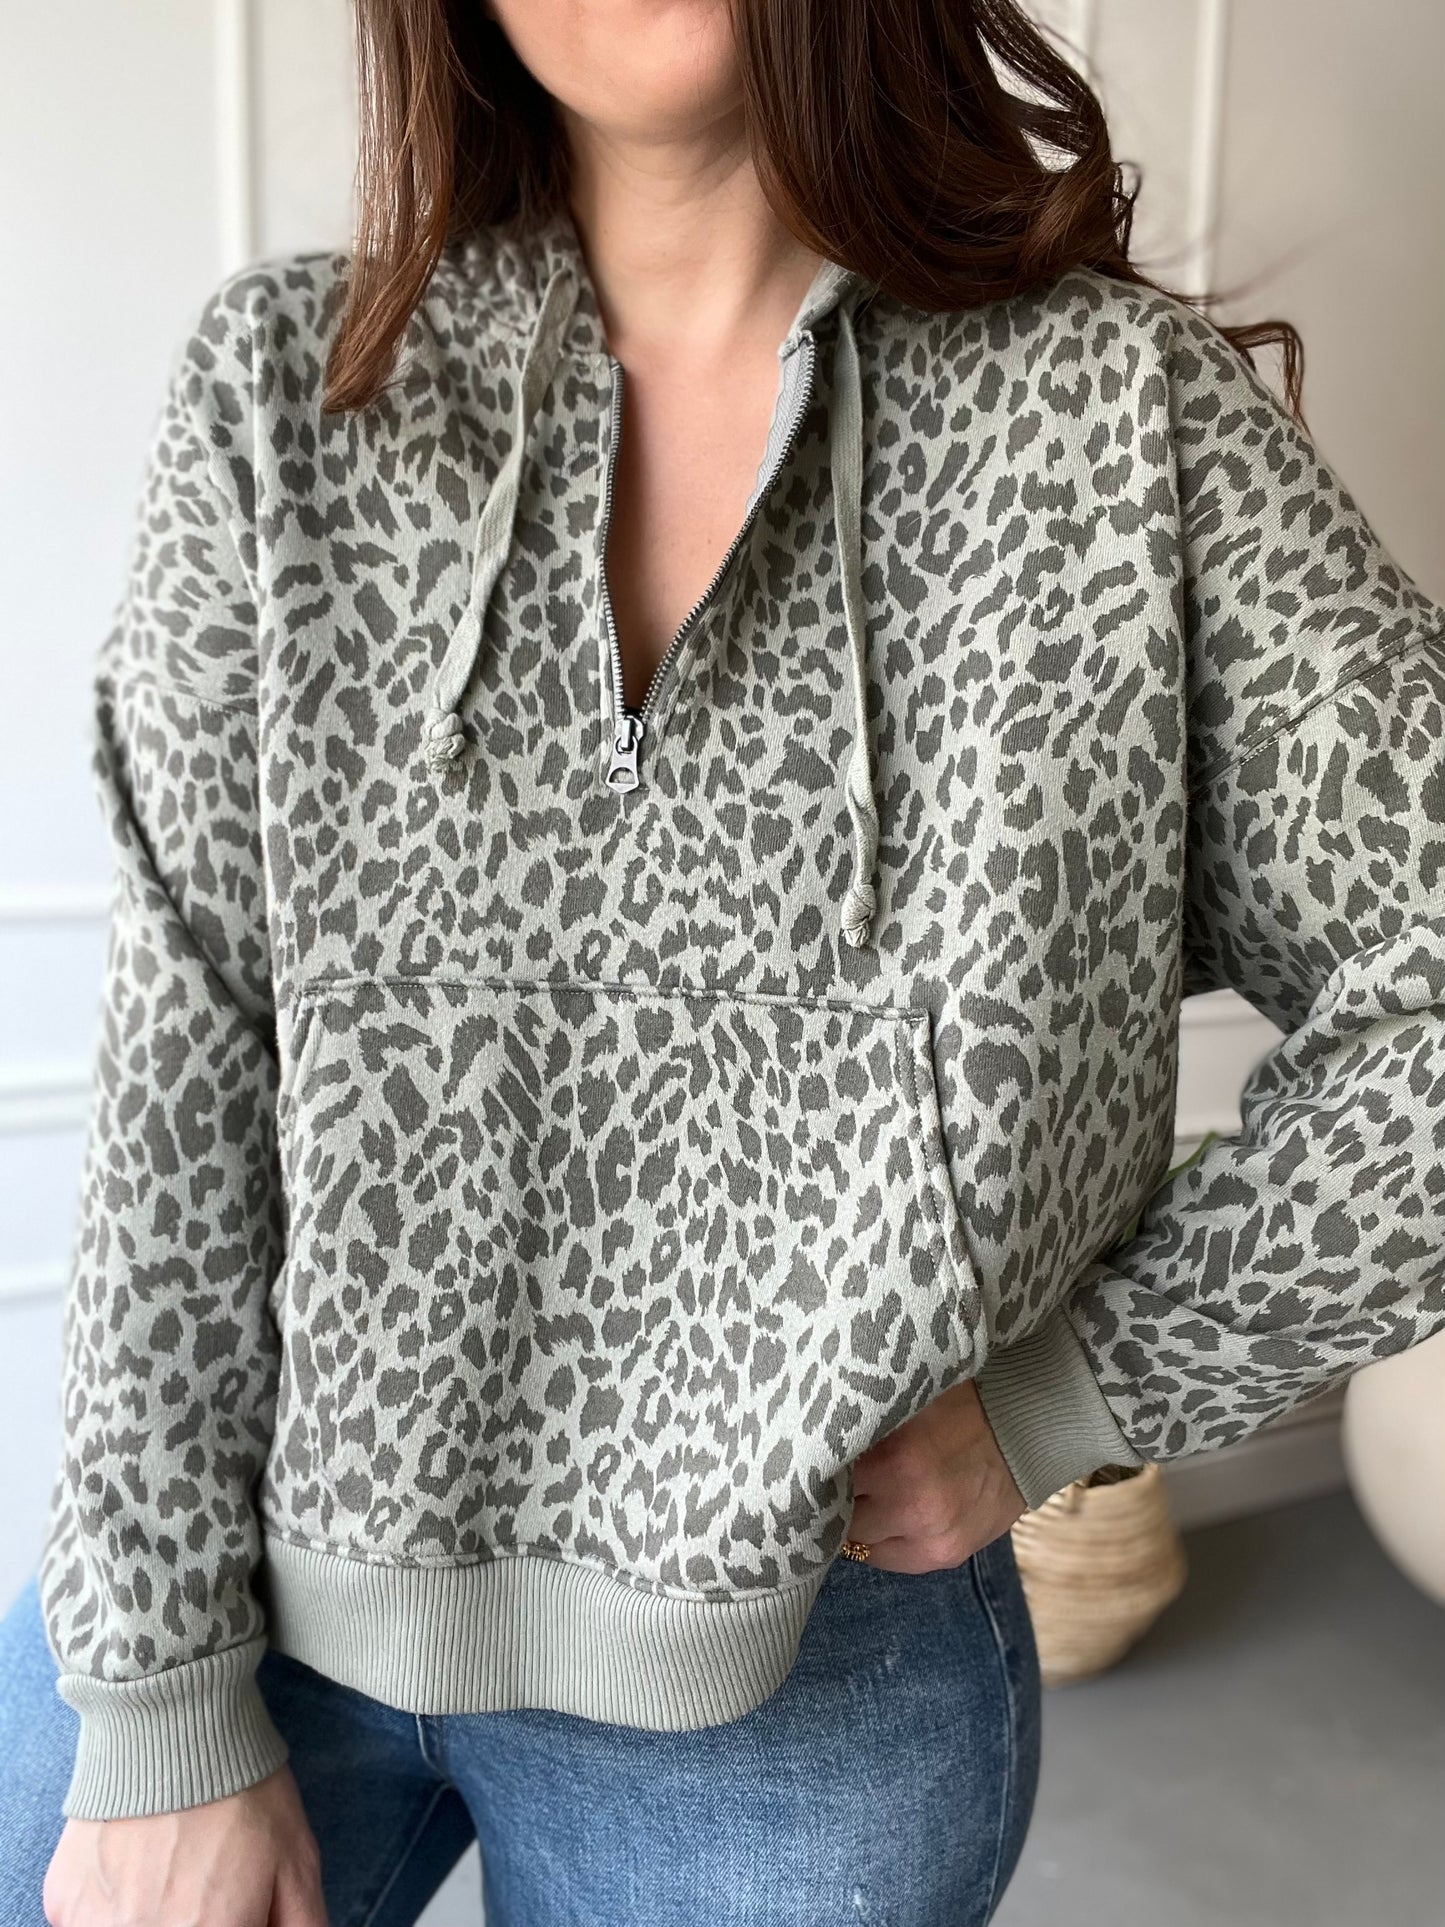 Olive Green Leopard Pullover - Size S/M